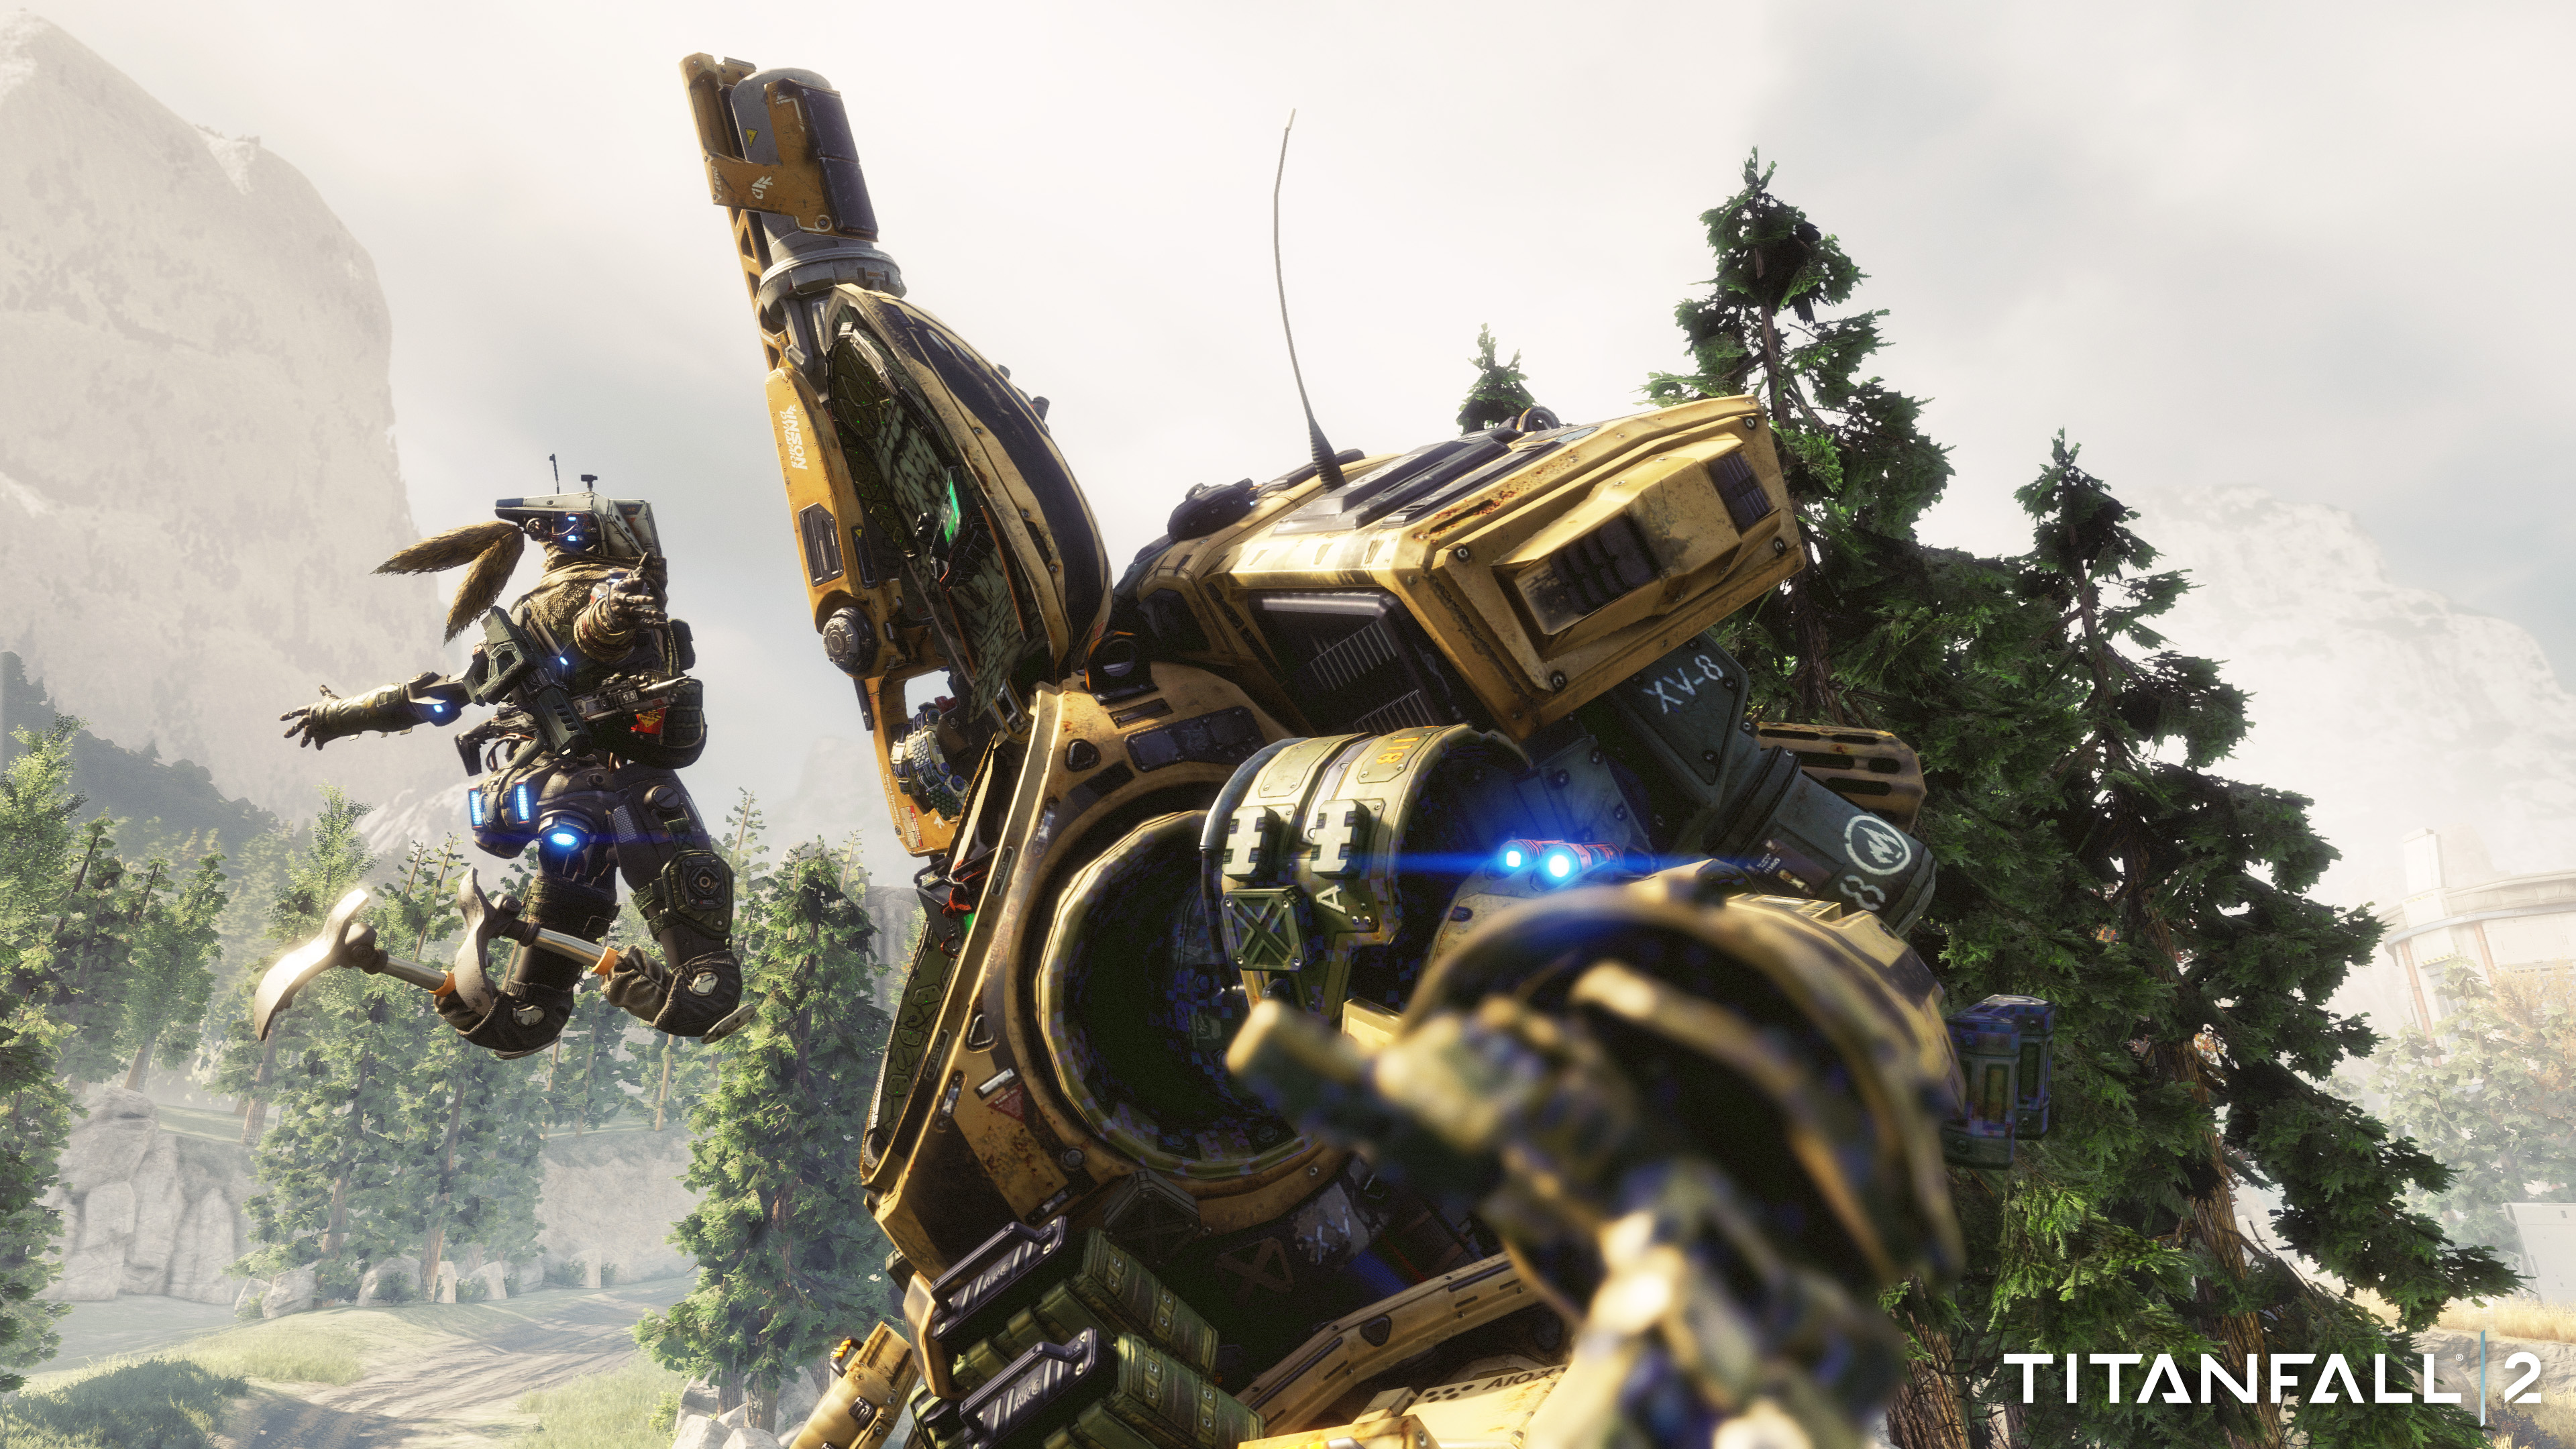 Titanfall 2, Electronic Arts, PlayStation 4, [Physical], 014633368741 - image 3 of 9